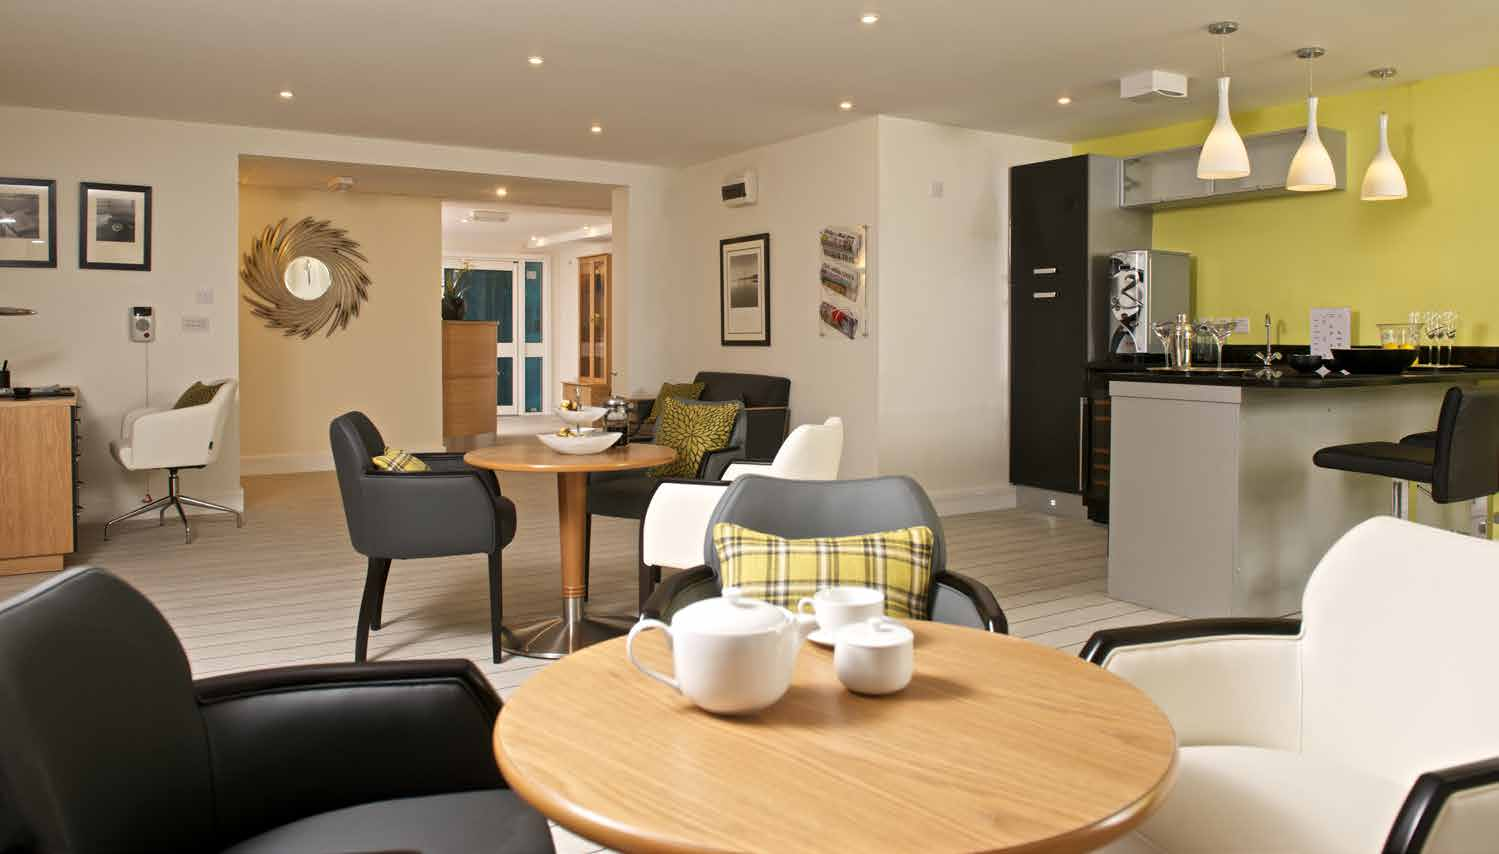 Enjoy the finer things in life with our Platinum Range Our Platinum Range Retirement Living and Assisted Living apartments can only be found at a select number of locations throughout the UK.